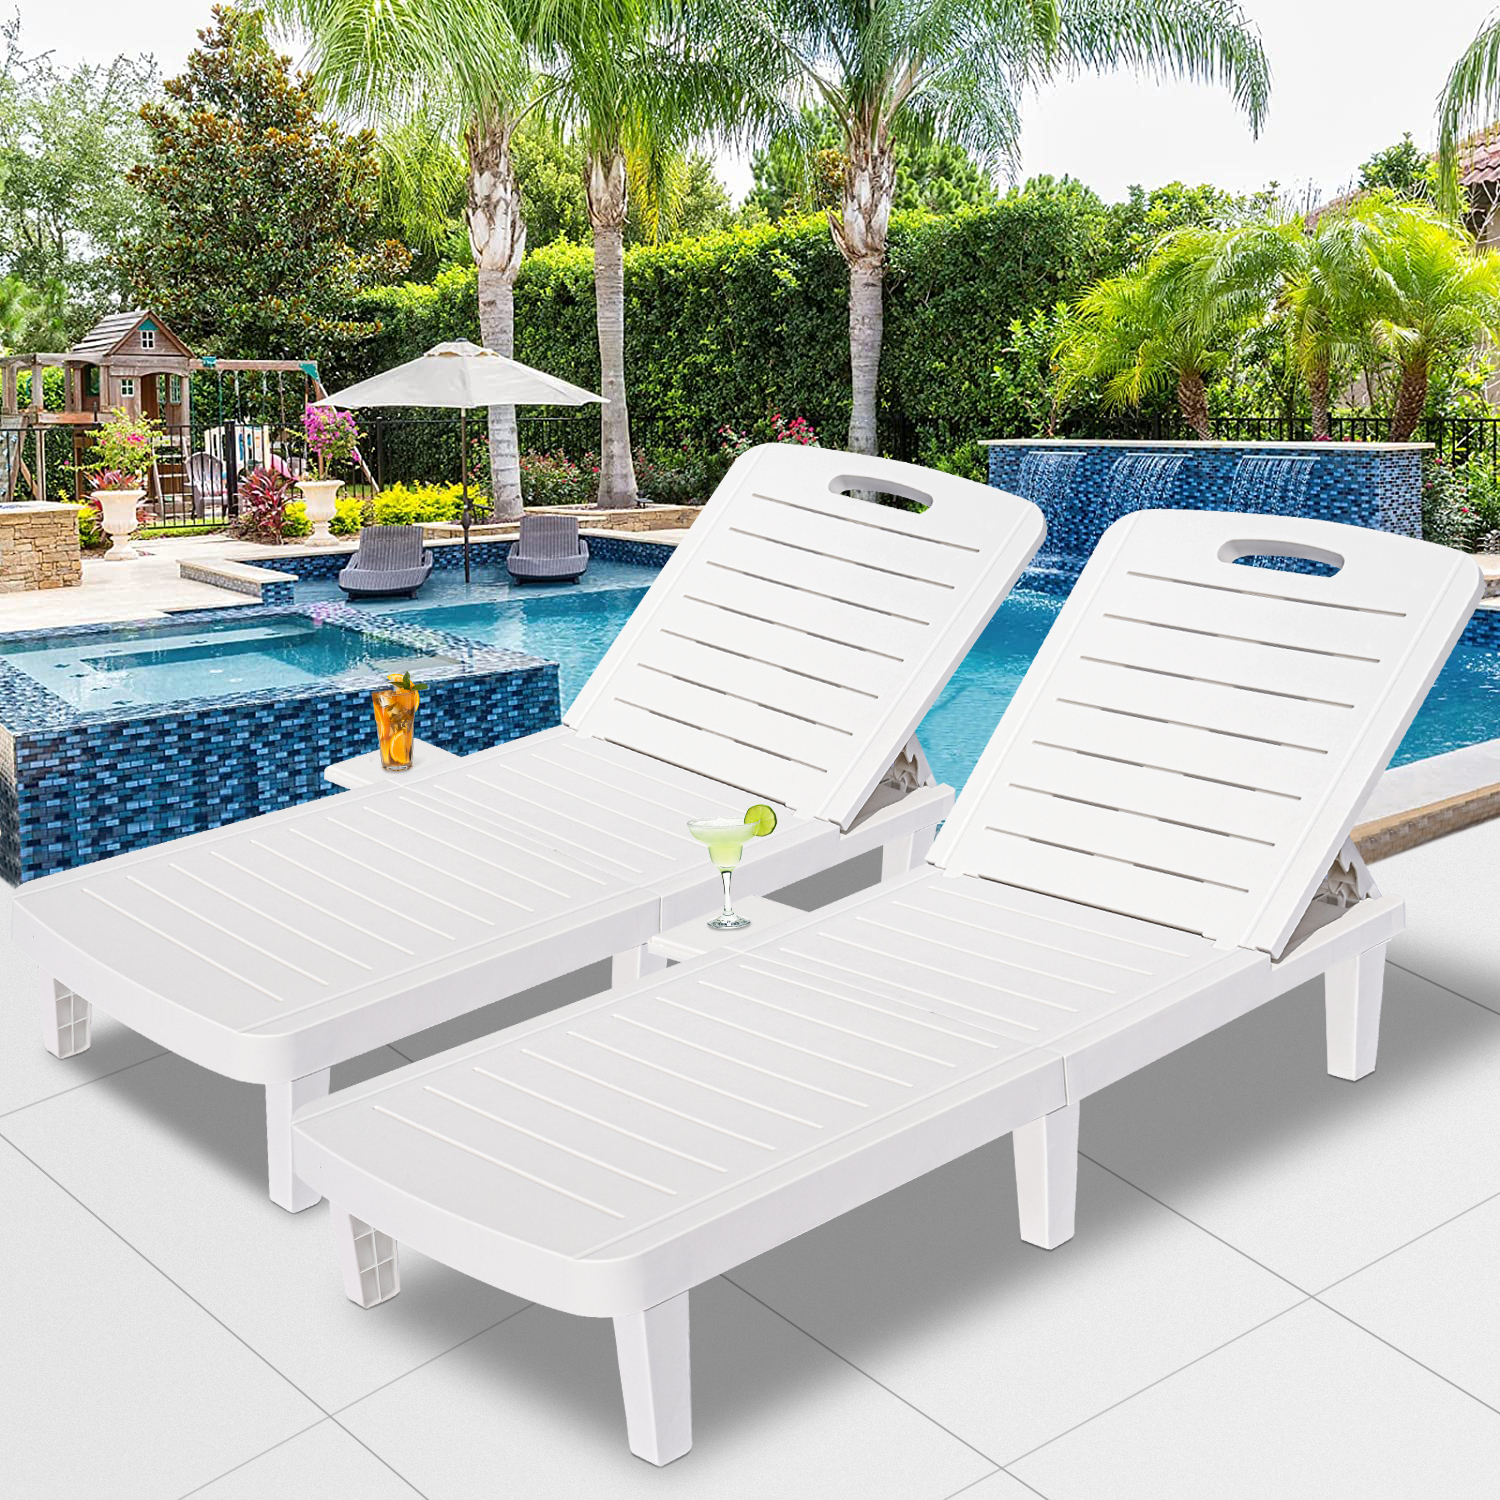 Patio Chaise Lounge Set of 2, Chaise Lounge Chairs Patio Furniture Set with Adjustable Back and Retractable Tray, All-Weather Plastic Reclining Lounge Chairs for Beach, Backyard, Garden, Pool, LLL1714 - image 1 of 10